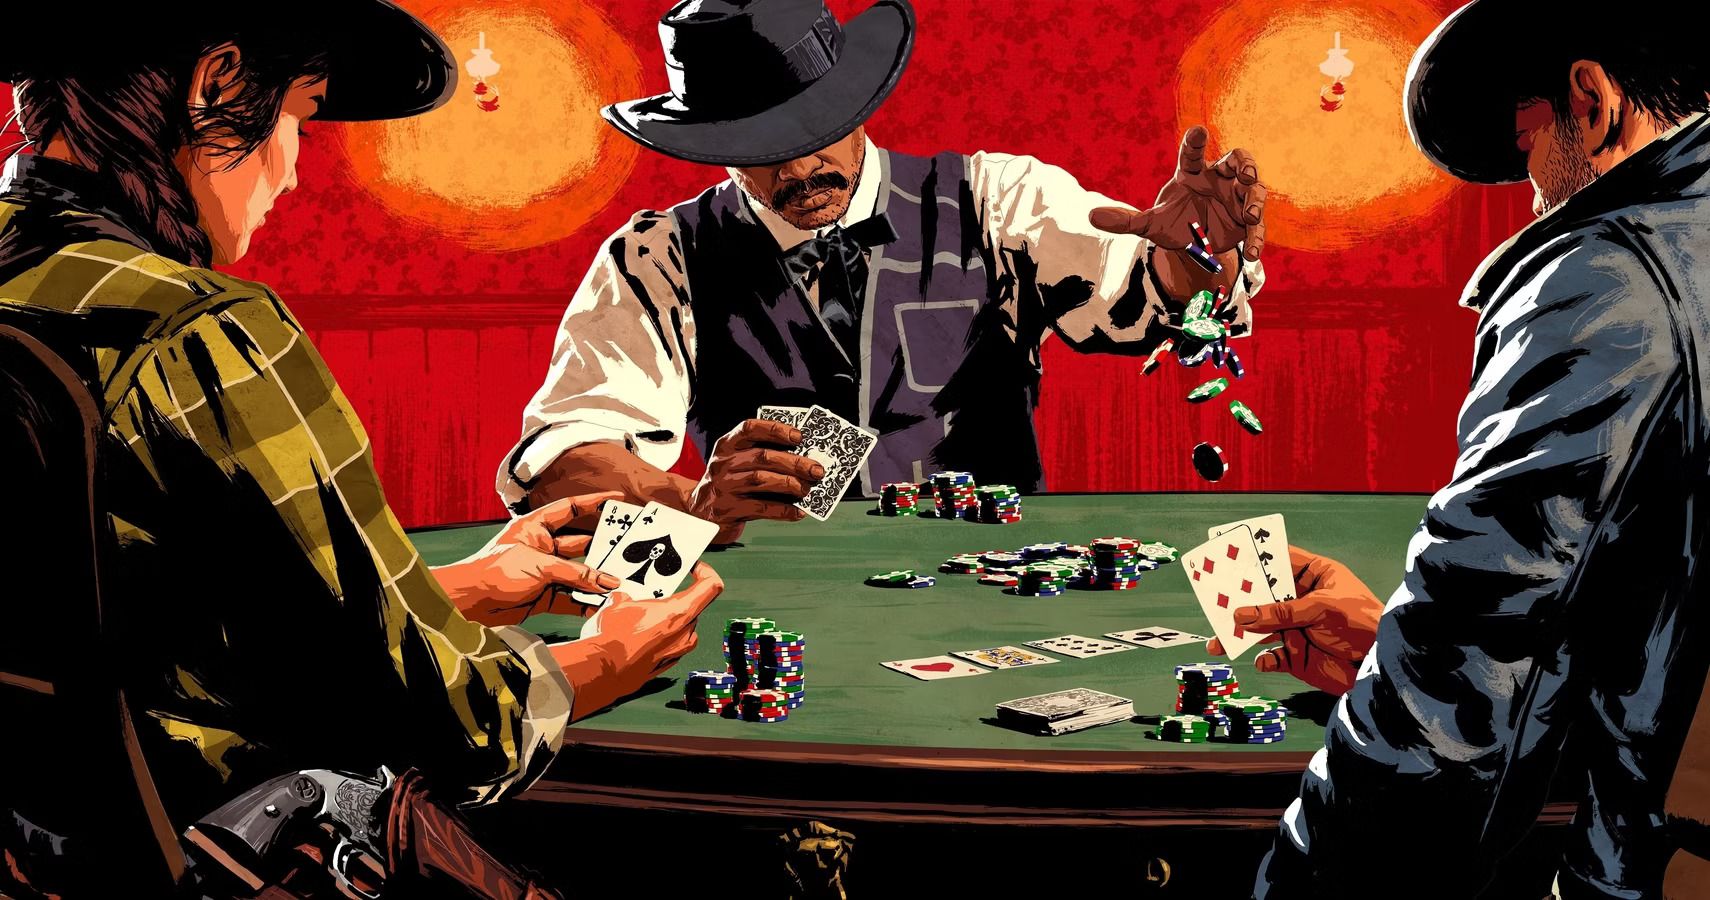 A group of cowpokes playing poker in red dead redemption